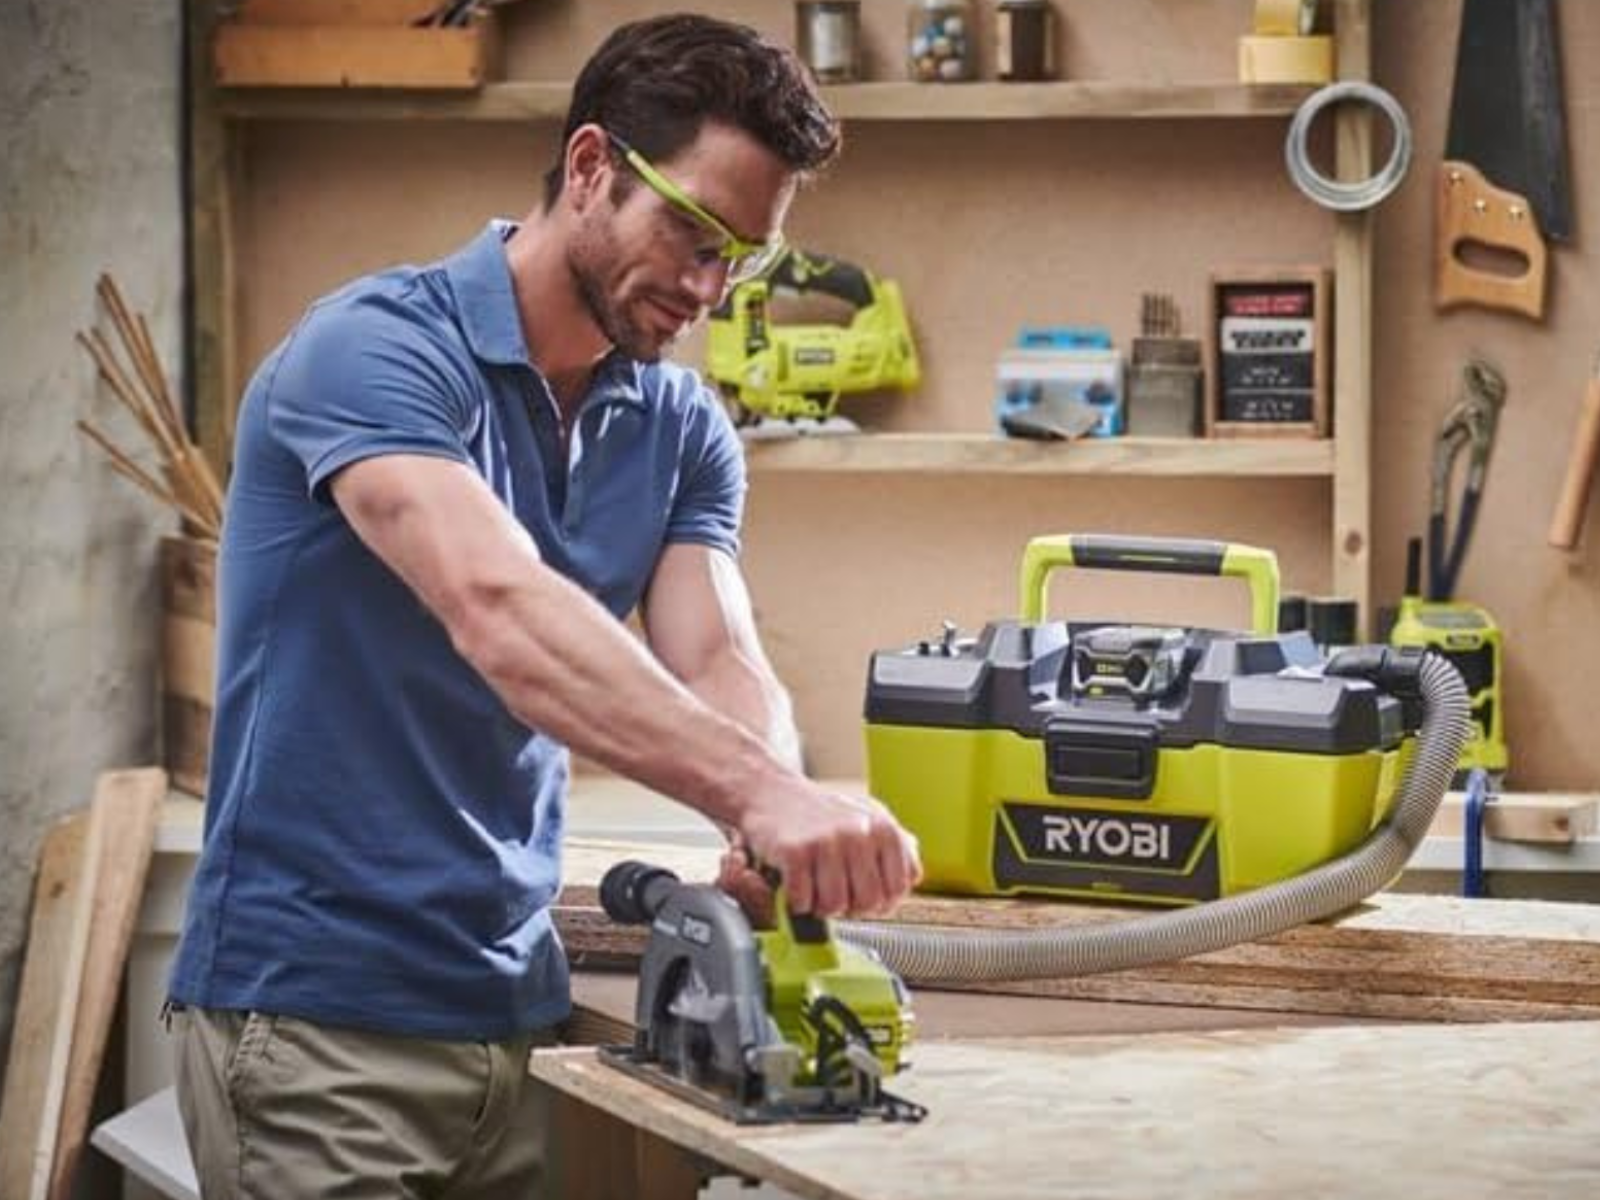 A man using a Ryobi cordless saw with a cordless vacuum as a dust catcher while cutting wood.